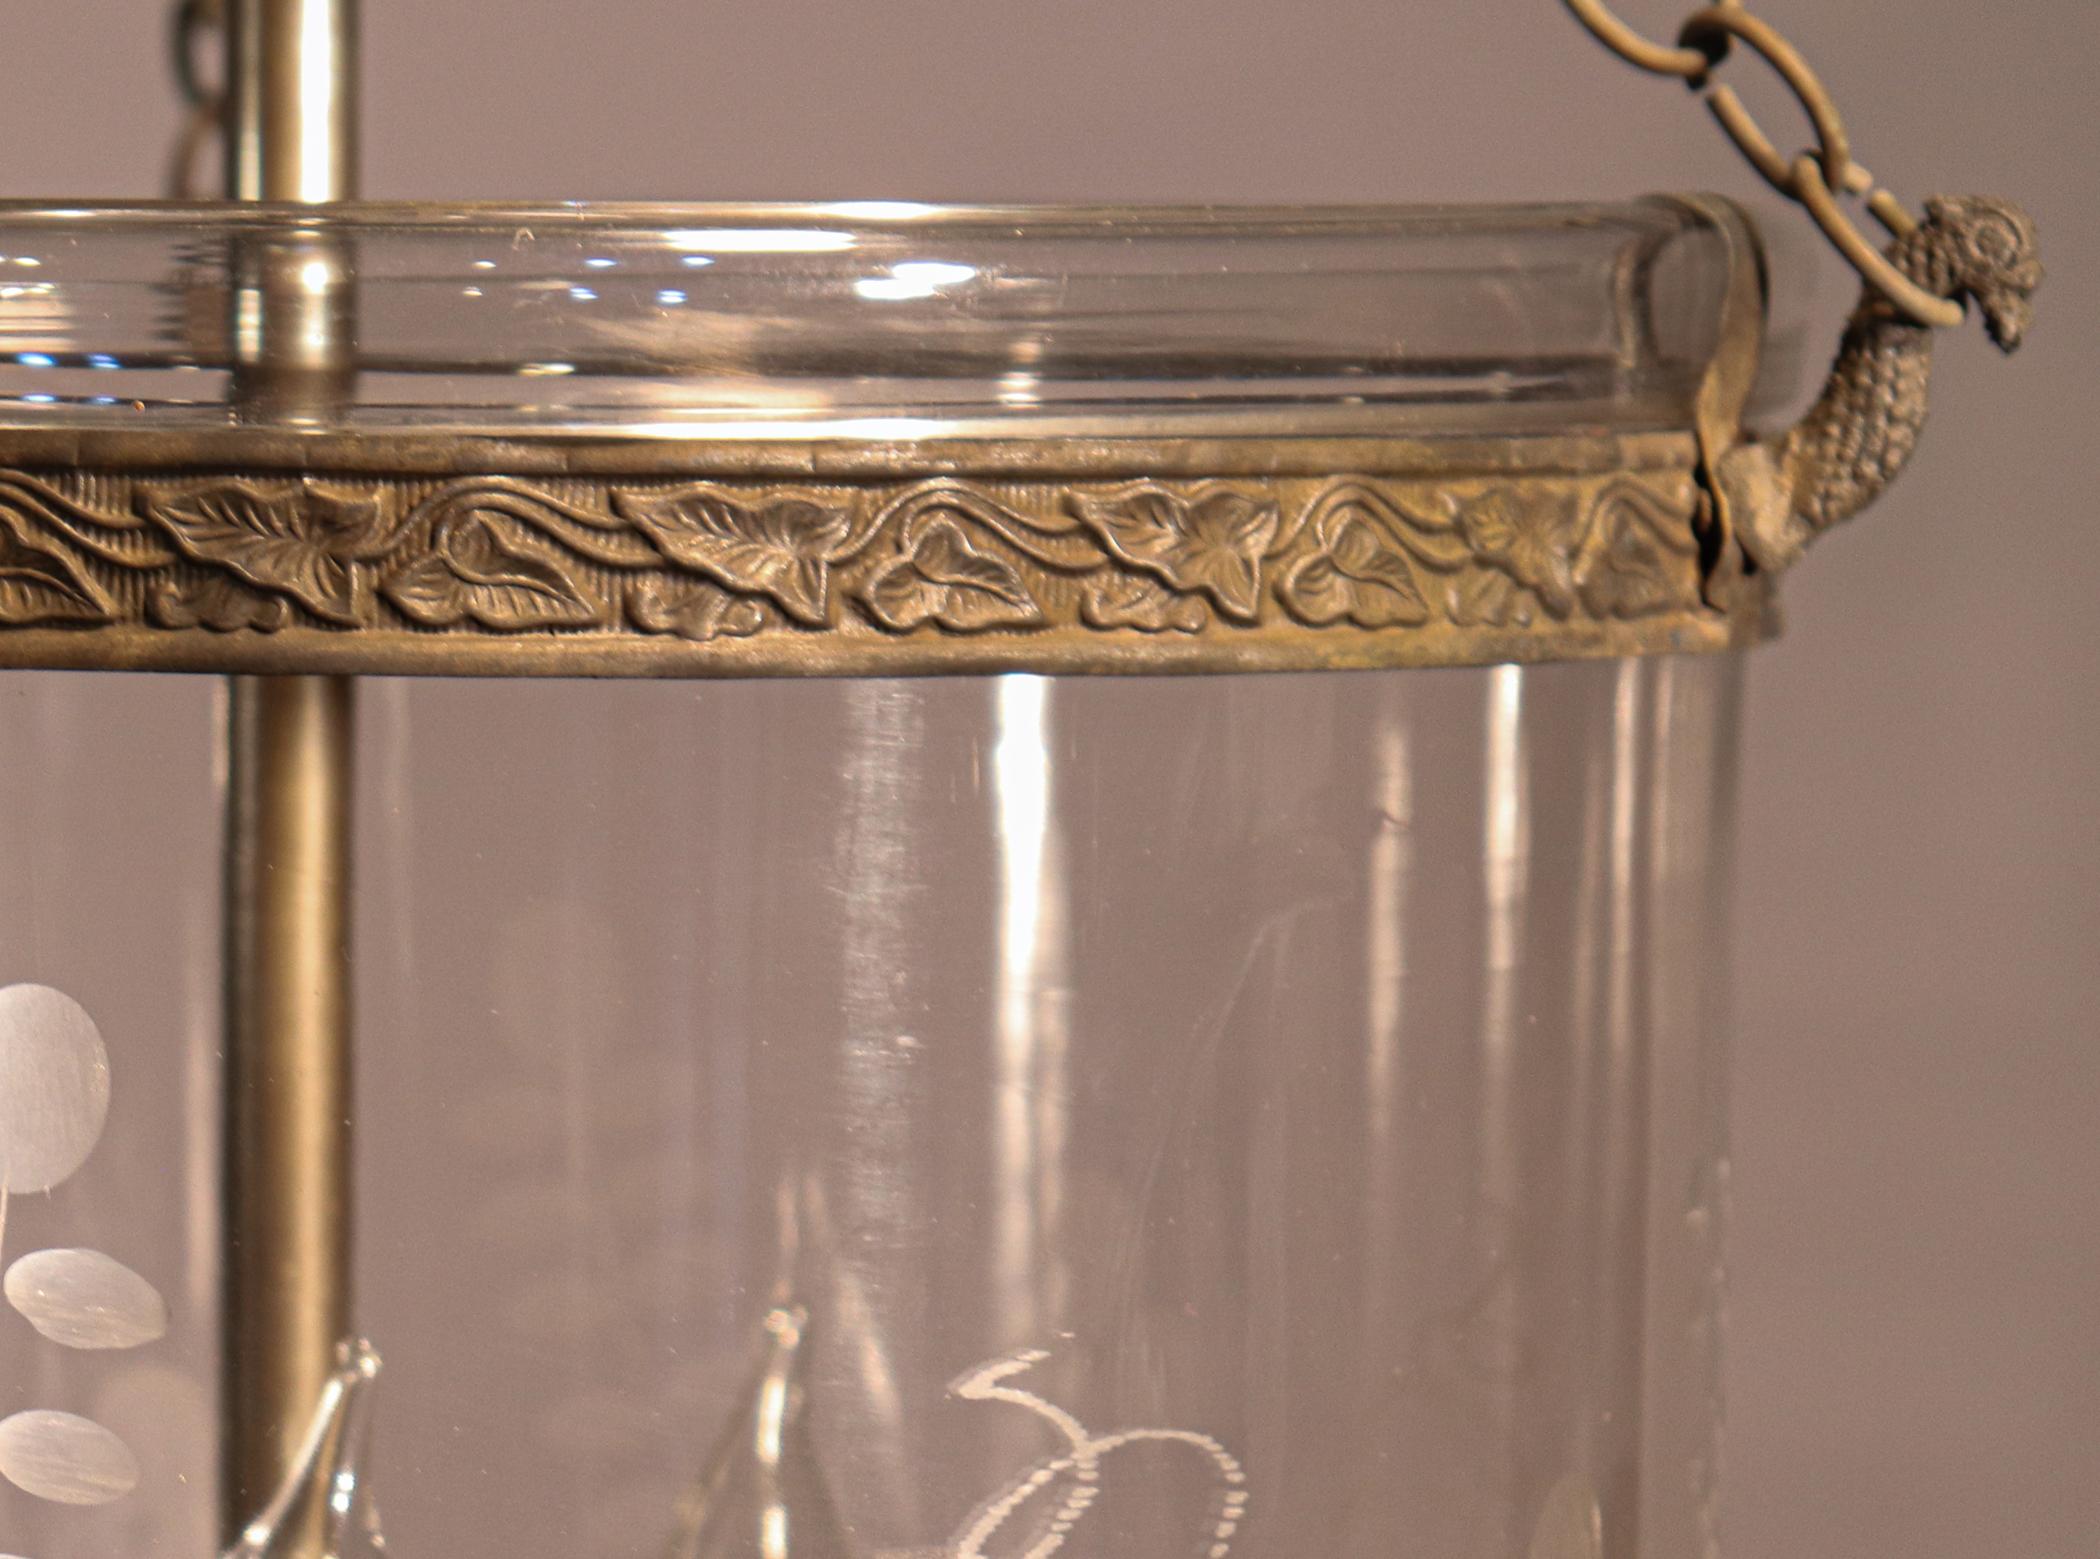 19th Century Antique Bell Jar Lantern with Floral Etching